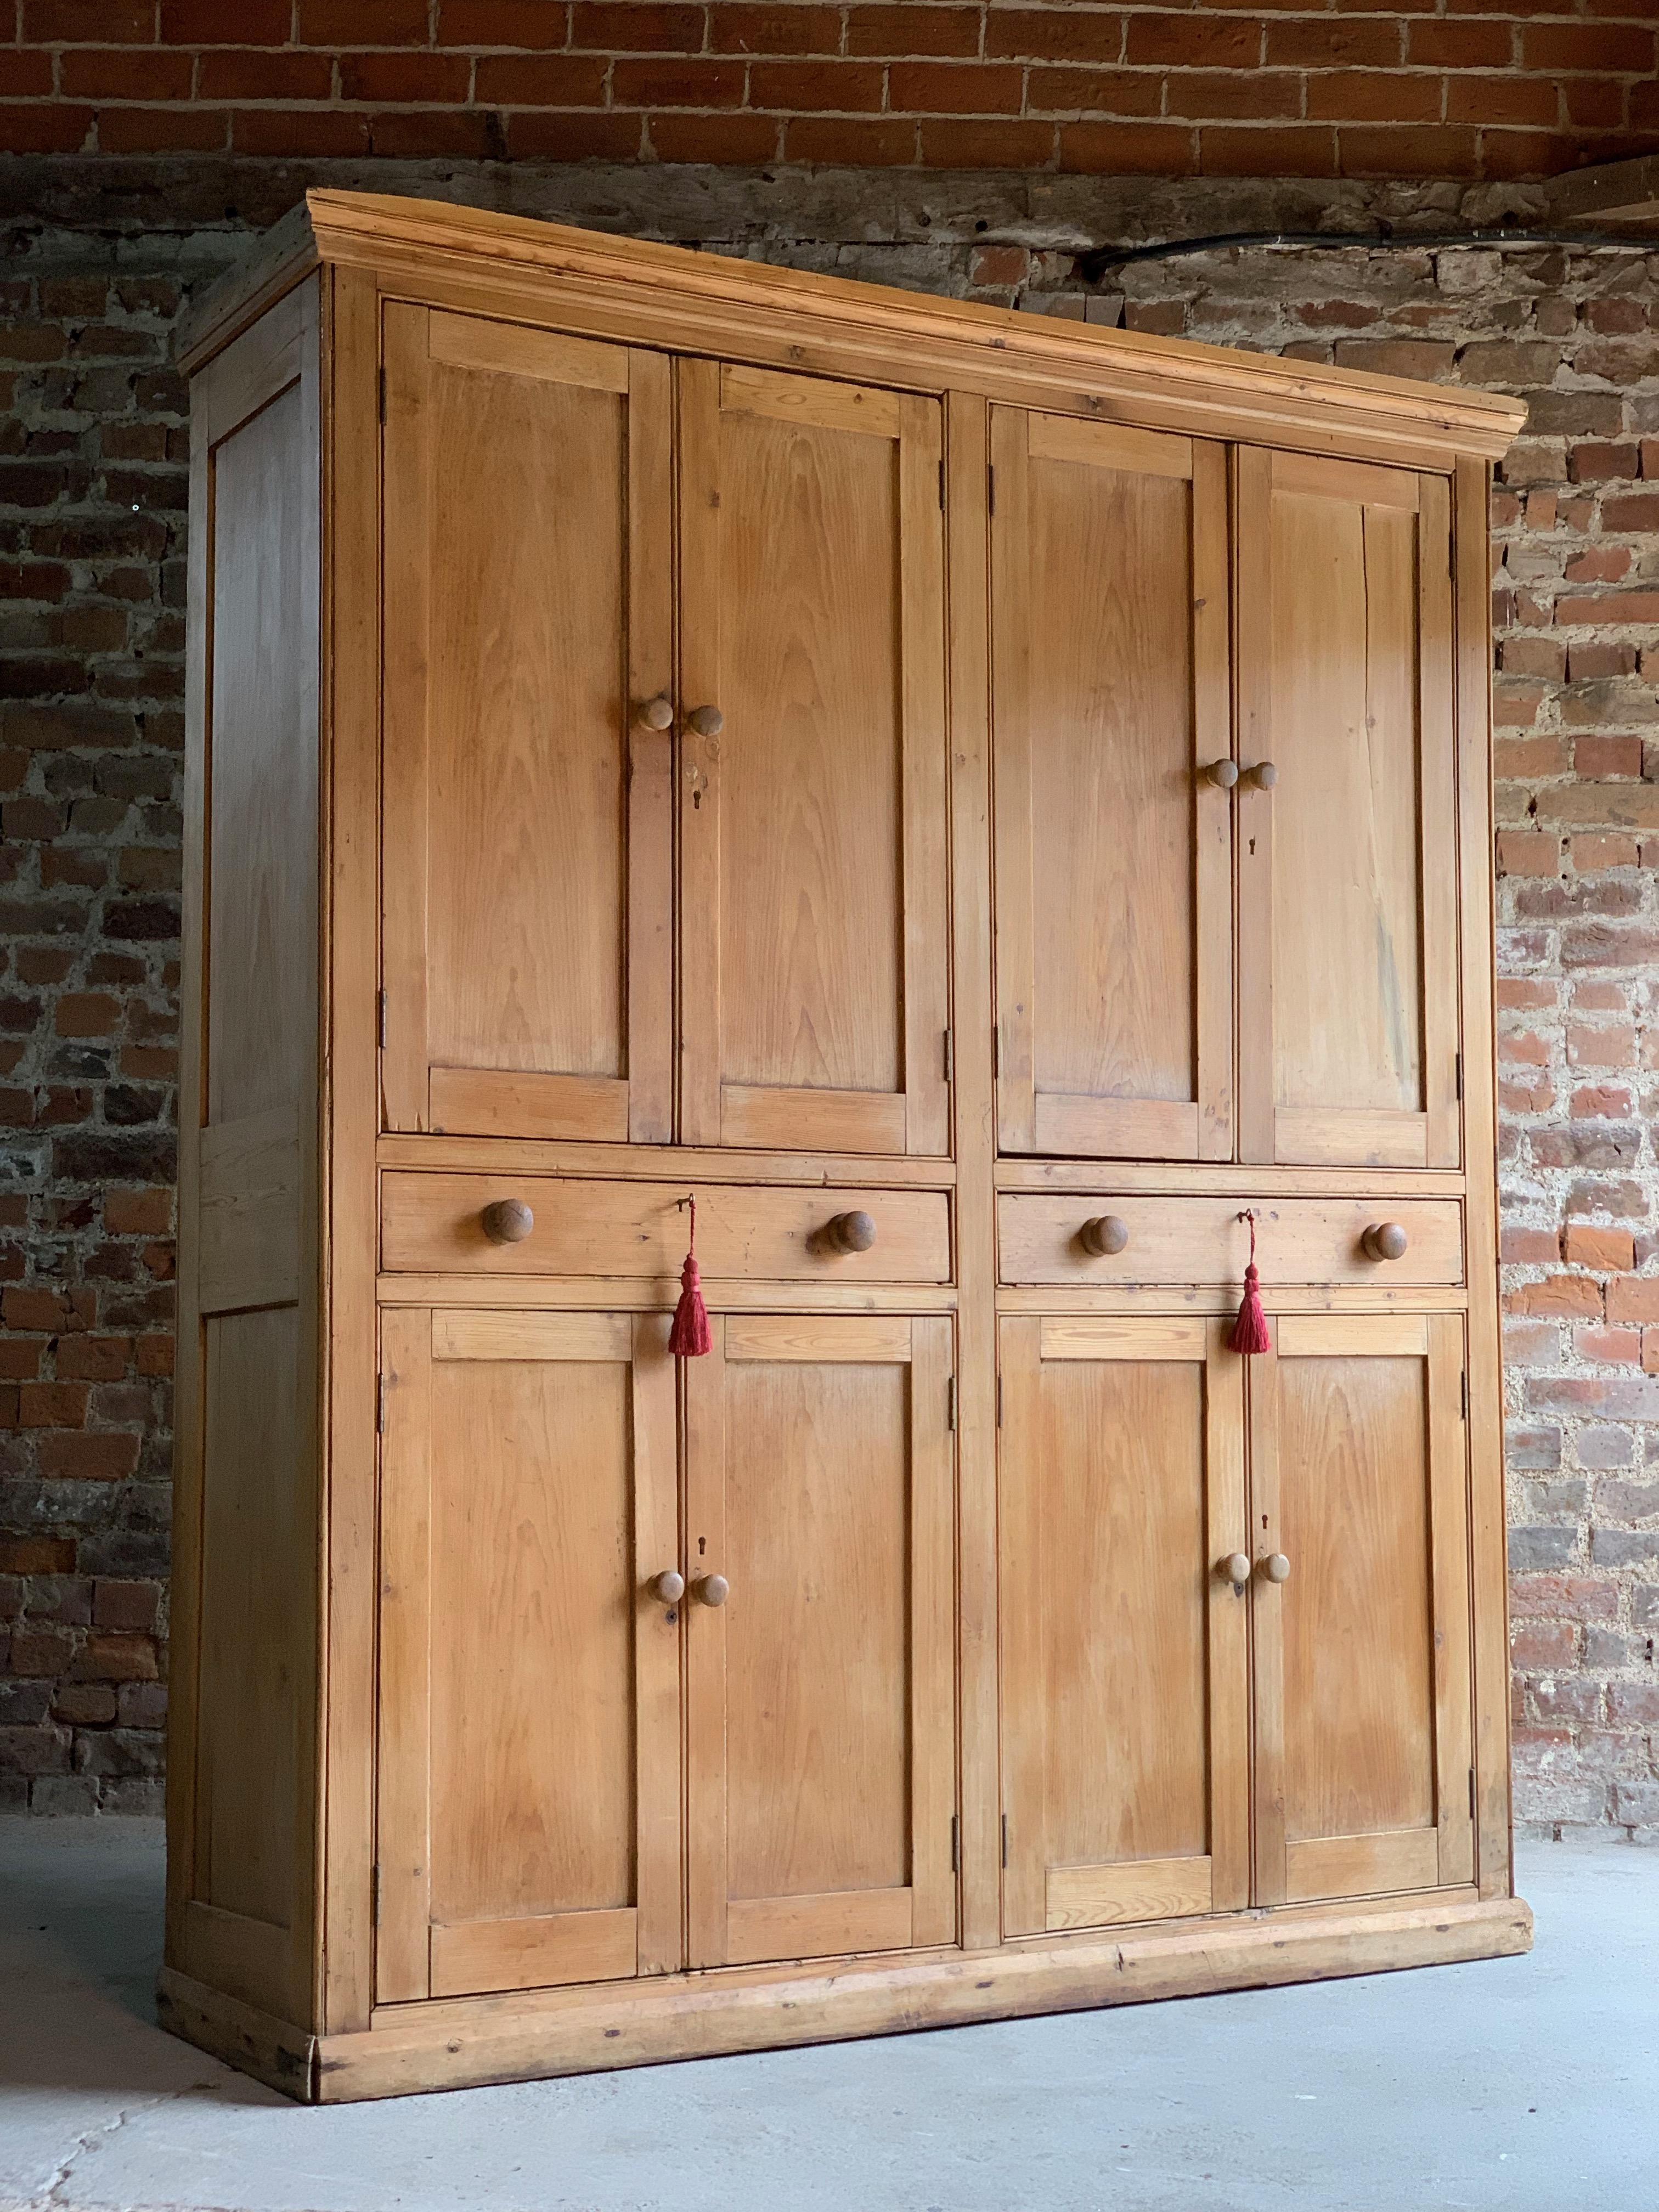 Victorian pine housekeepers cupboard pantry antique 19th century circa 1890

A magnificent large and imposing antique Victorian pine housekeepers cupboard circa 1890, The top section with cornice over four panelled cupboard doors with knob handles,